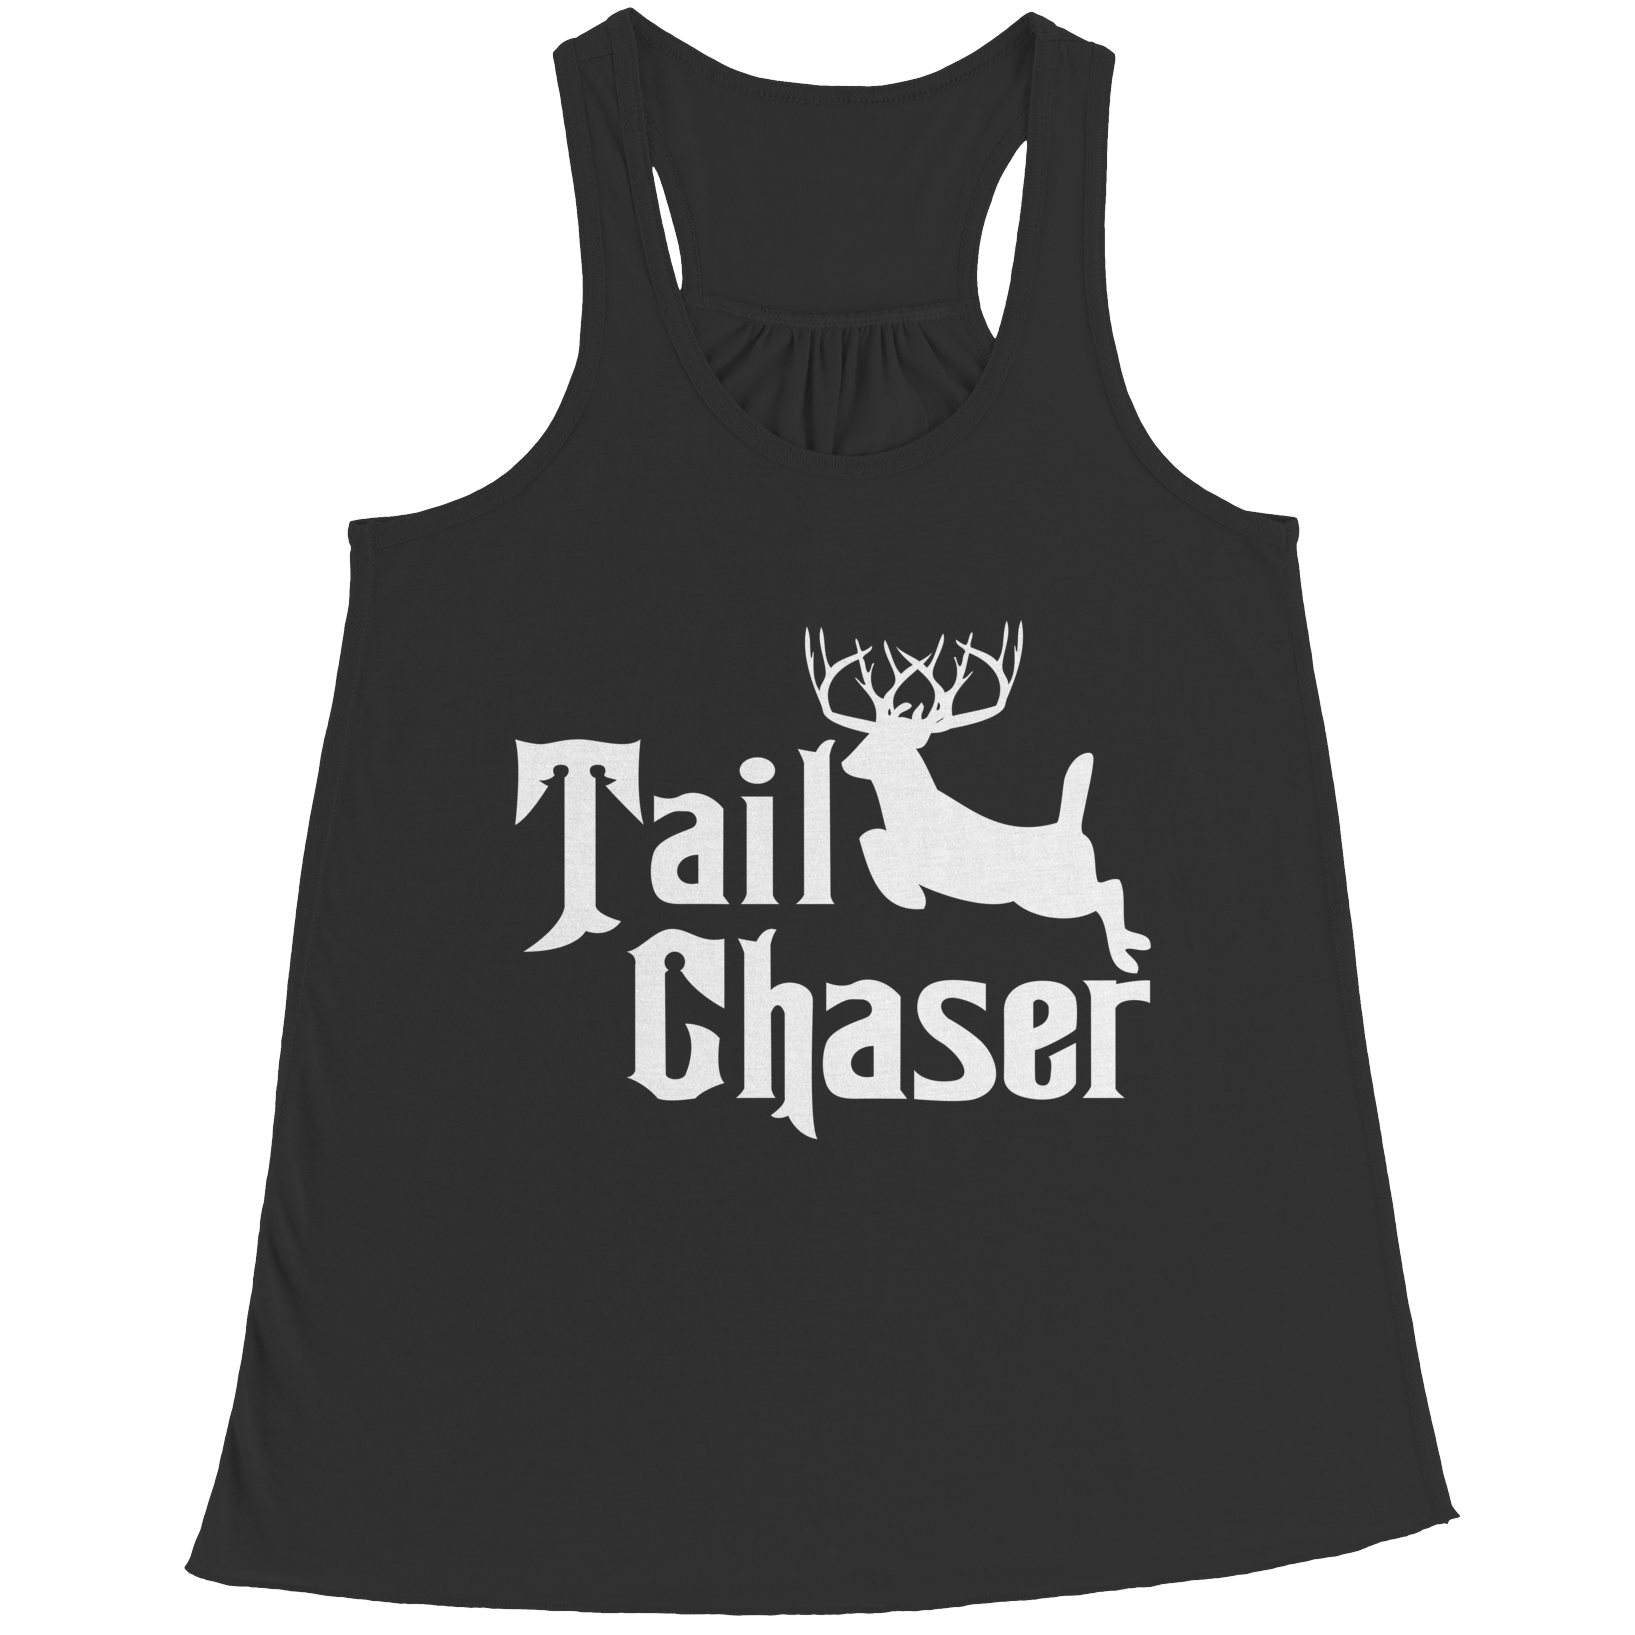 Limited Edition - Tail Chaser